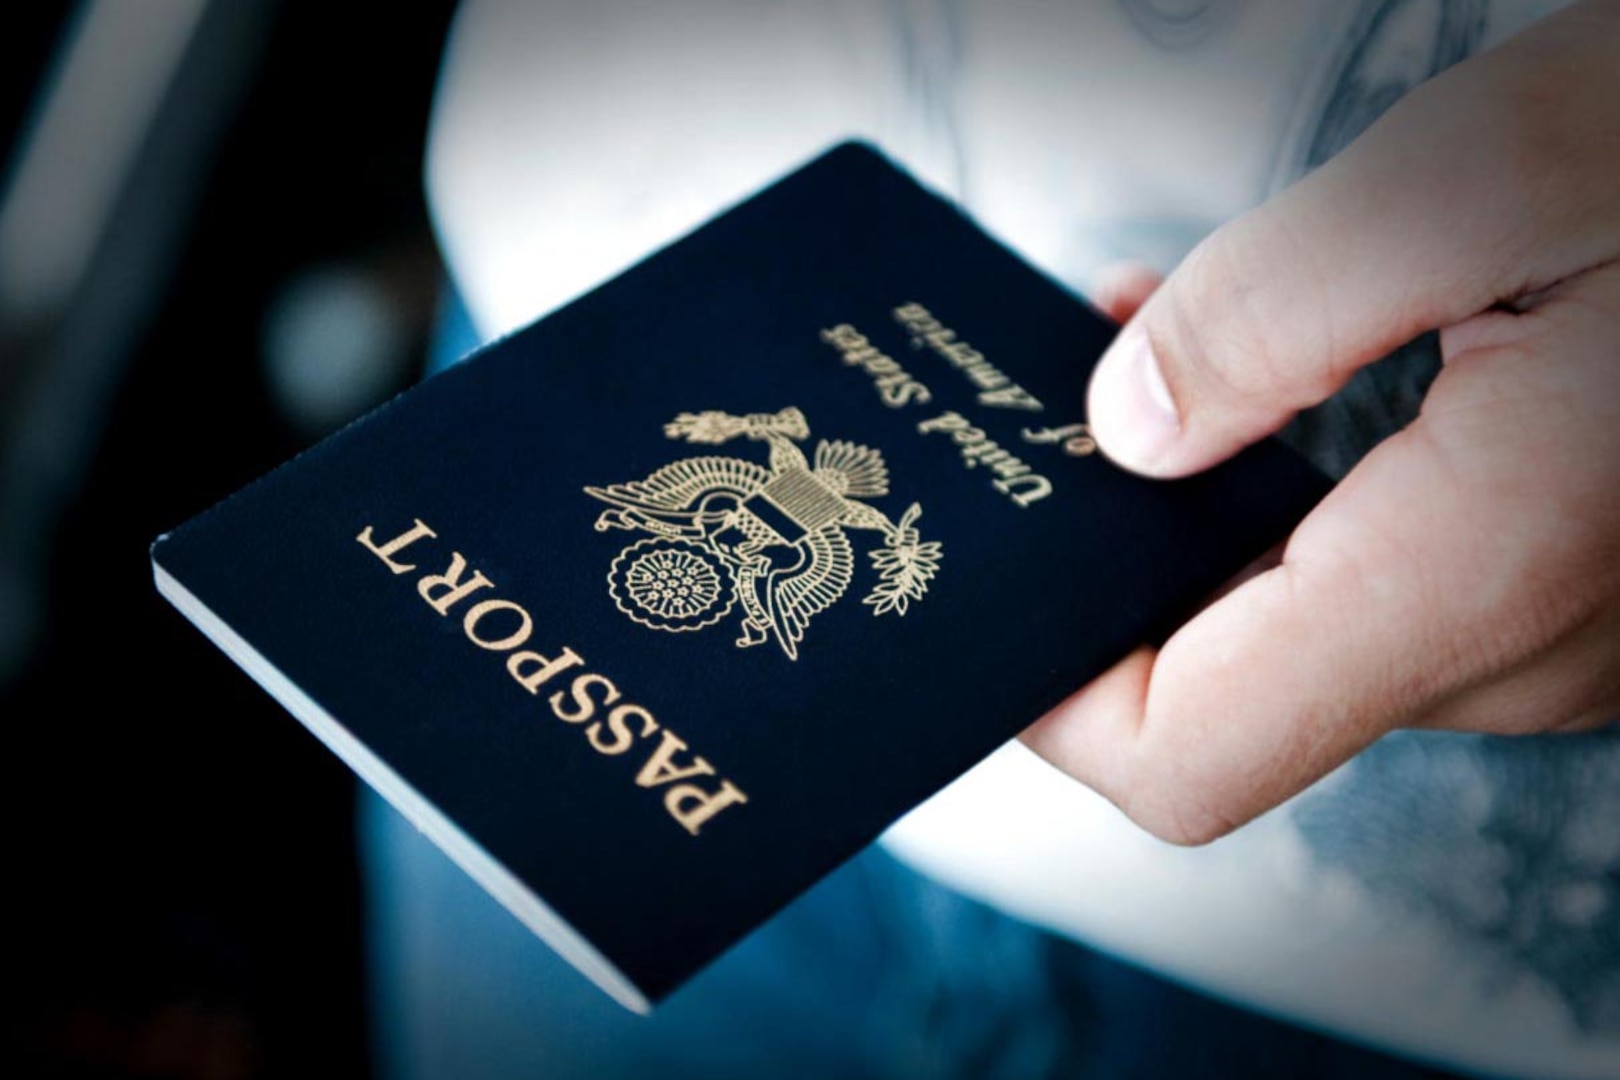 A blue passport book is held in a hand.